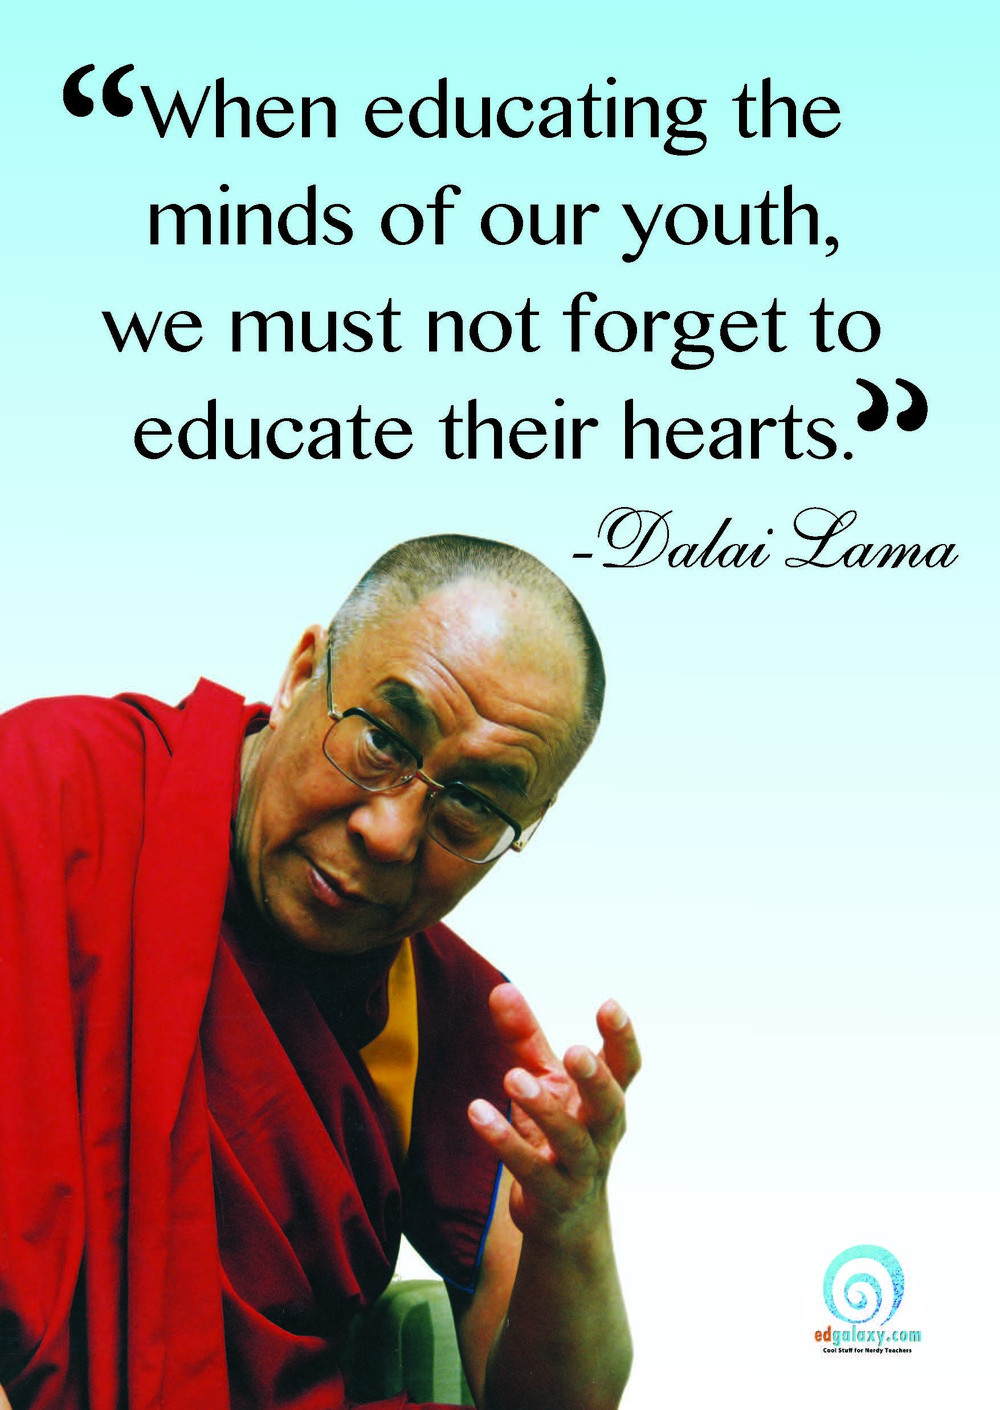 Quotes Of Education
 Education Quotes Famous Quotes for teachers and Students